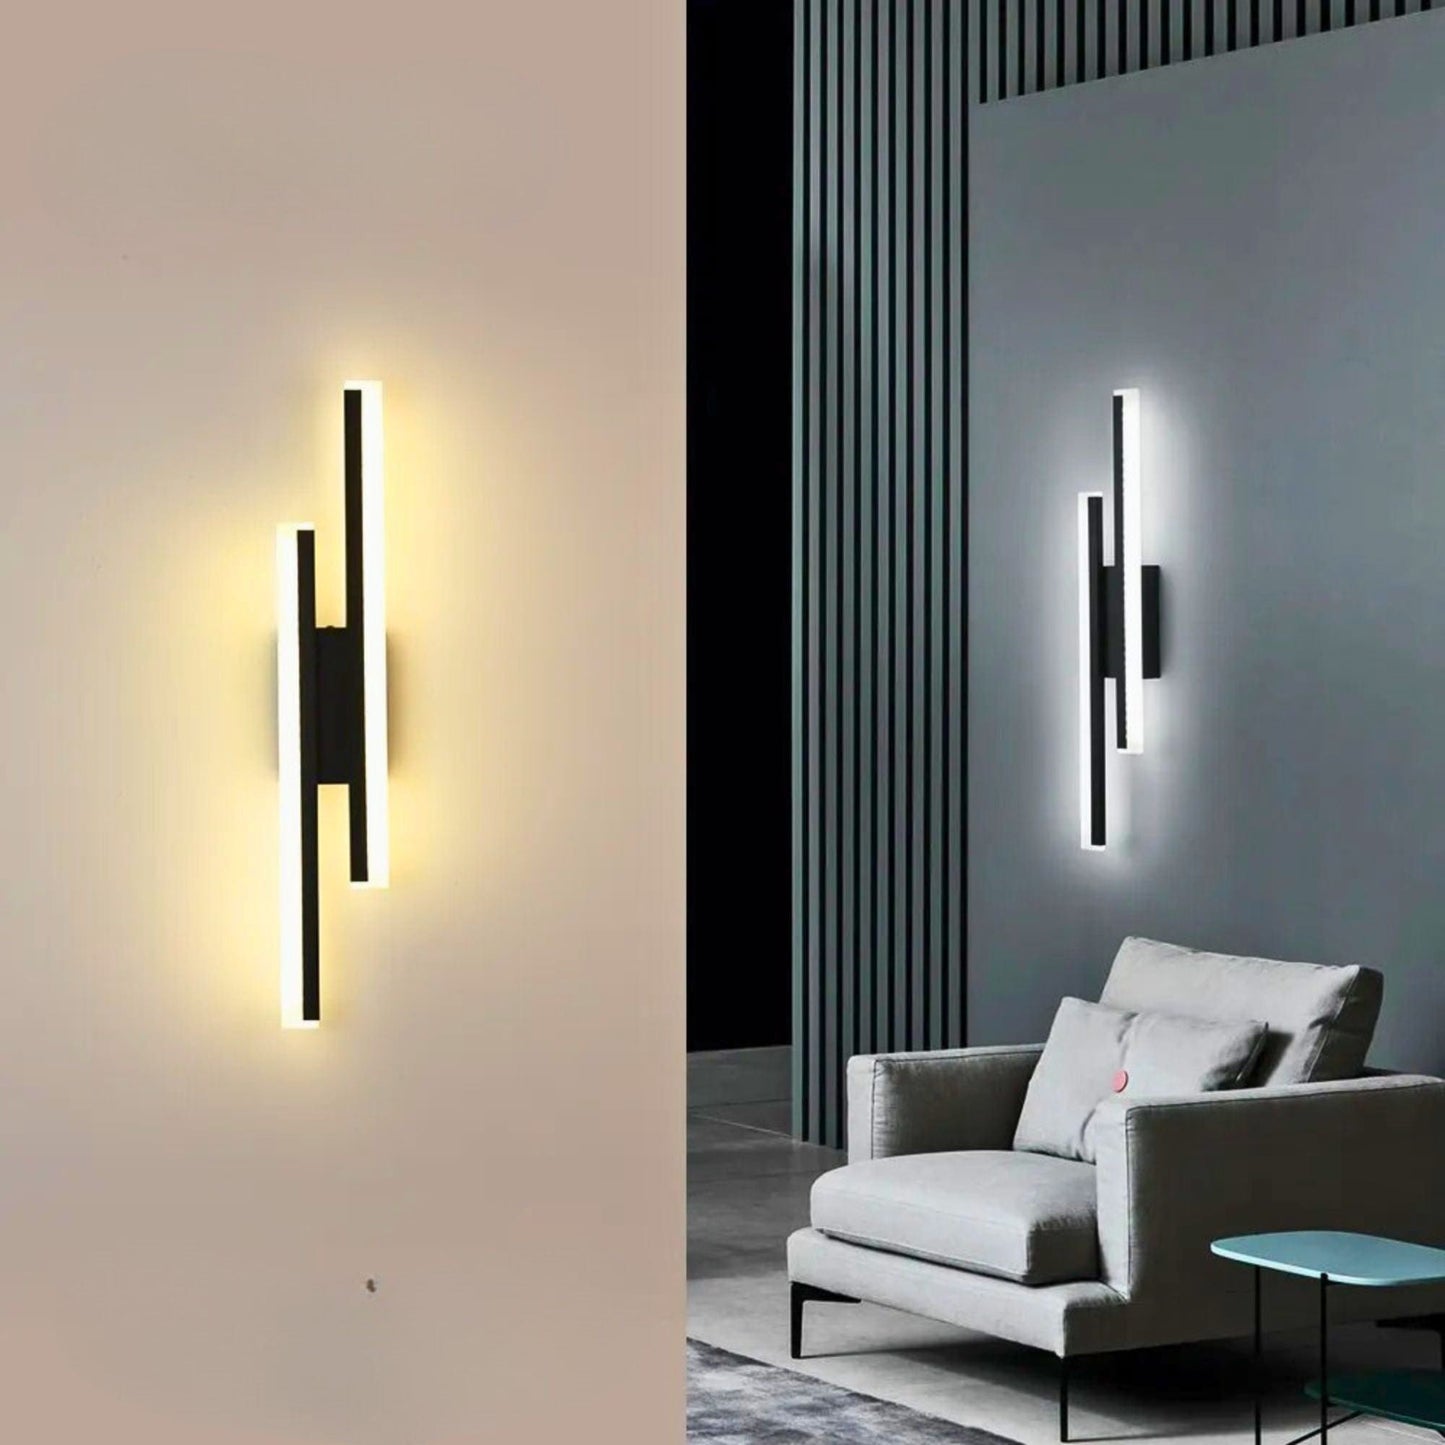 Home Finesse Modern Nordic LED Wall Sconce Light: 12W, Black